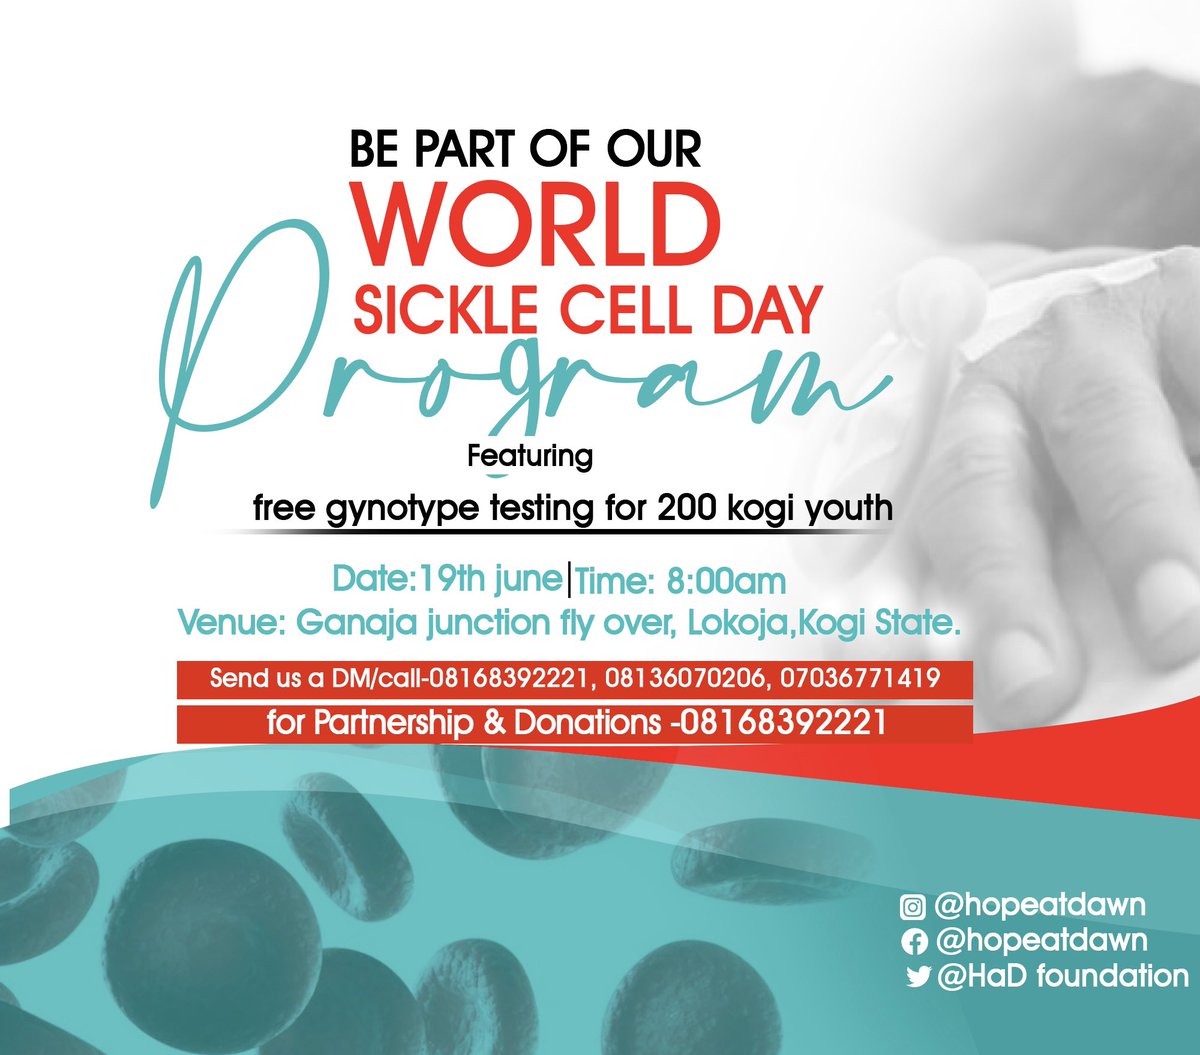 Join us on June 19th for our Sickle Cell Awareness Campaign! 🩸 Free genotype testing & powerful advocacy to make a difference. Together, we can fight #SickleCell! 💪 #KnowYourGenotype #June19th' 

Osimhen Eniola Badmus Kato Lubwama Bella Shumurda Martial iOS 17 Ronaldo Iyabo Ojo